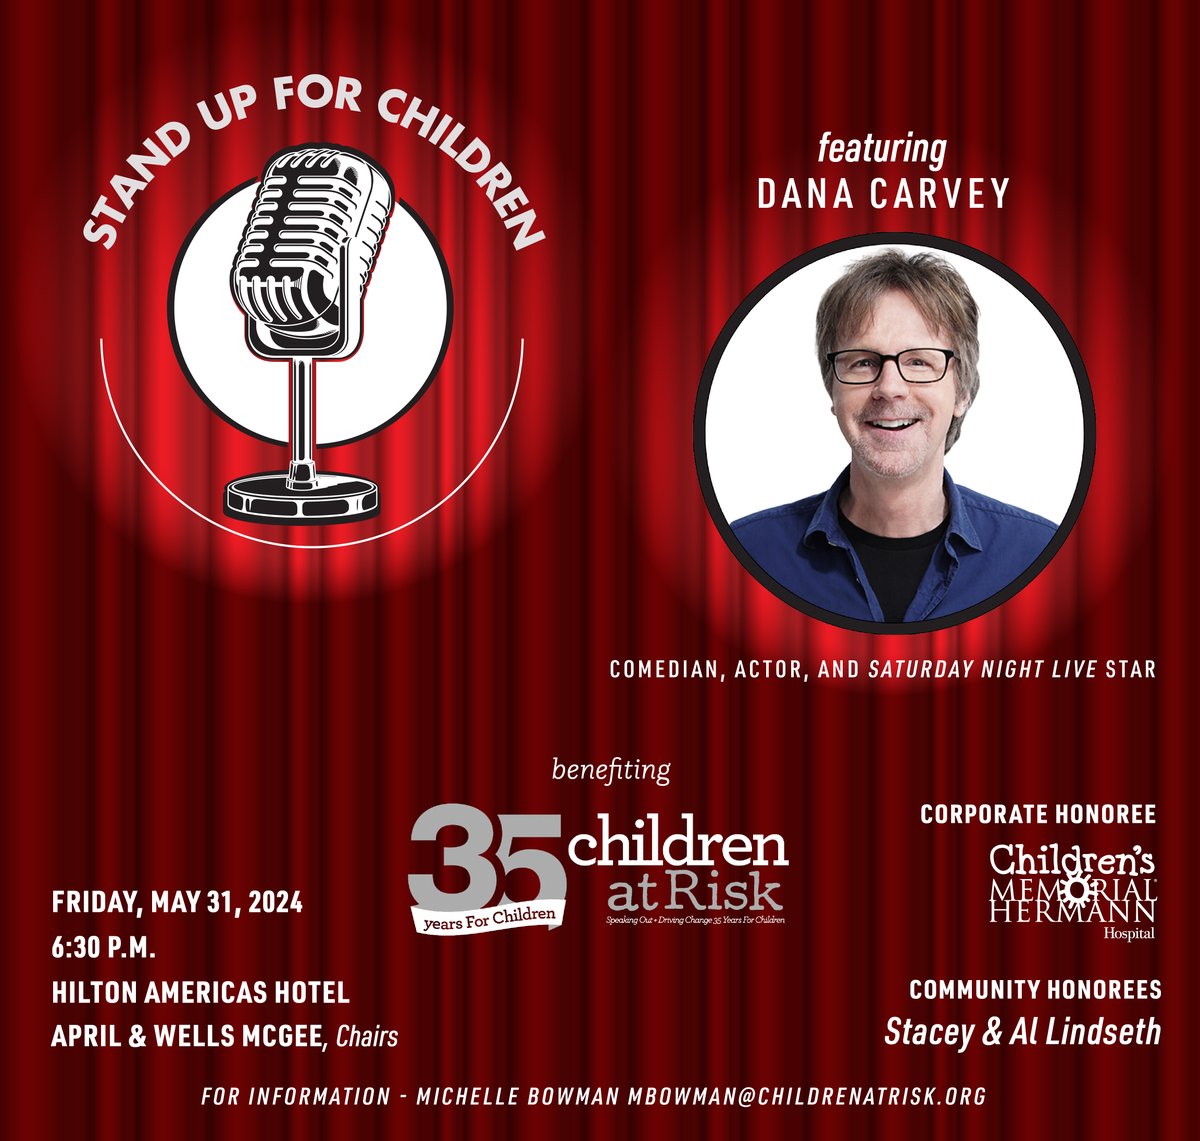 Throwback to unforgettable nights at Stand Up for Children Gala, filled with laughter & love! This year, comedy legend Dana Carvey joins our stellar lineup of past comedic giants. Ready for another amazing evening on May 31st? Let's laugh for a cause! ow.ly/x2S250QZay5